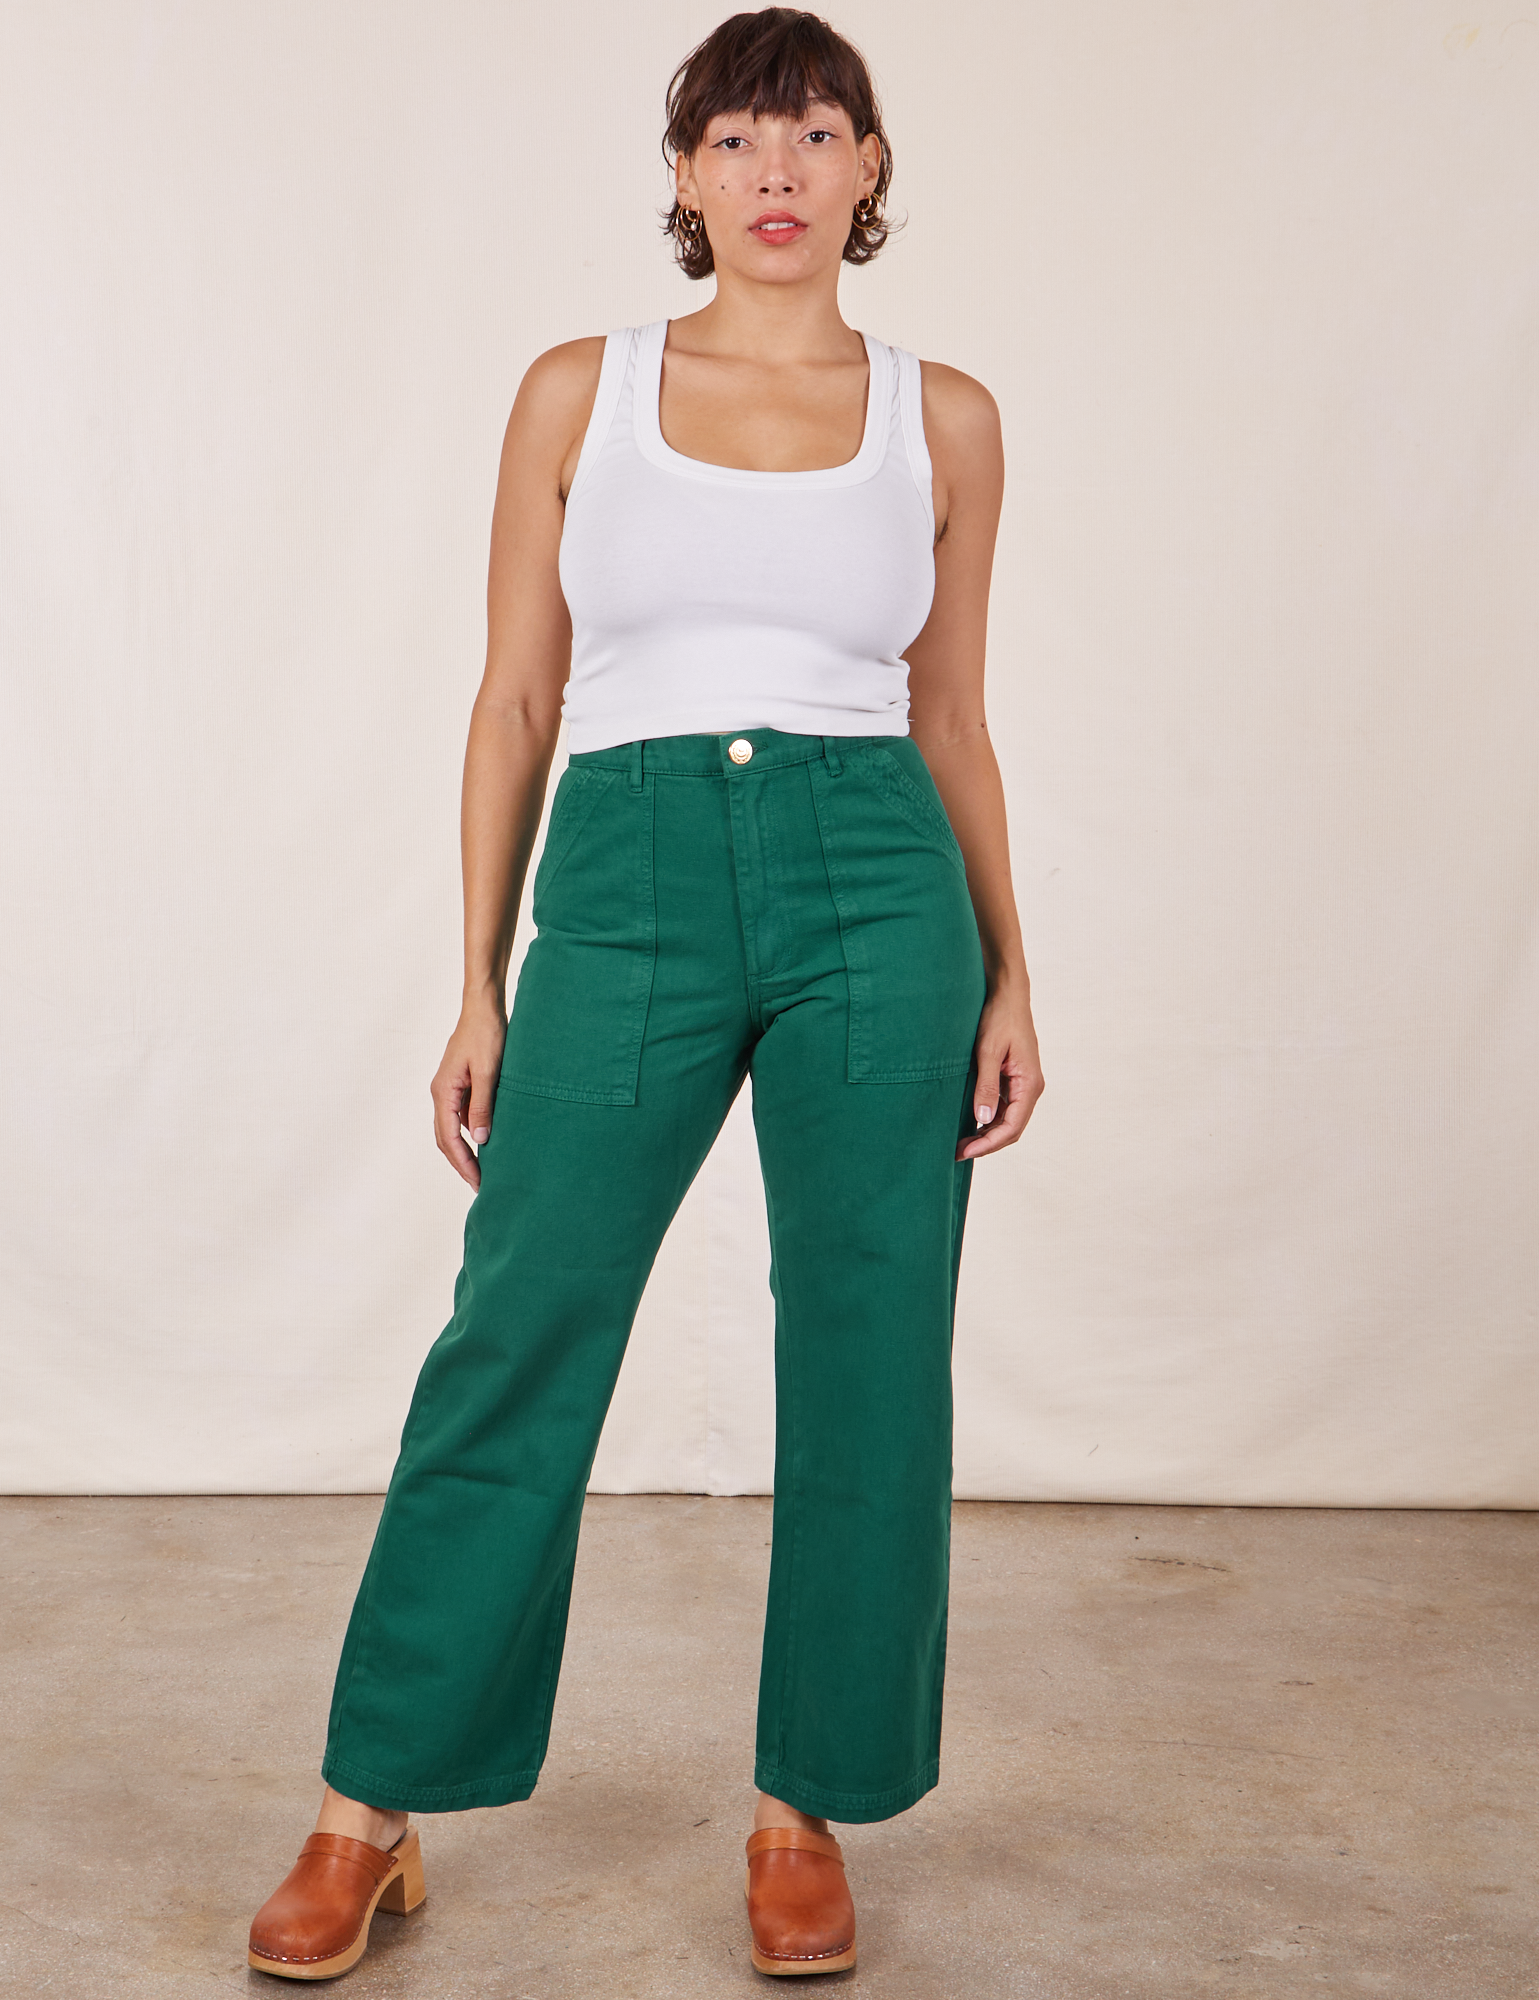 Tiara is wearing Work Pants in Hunter Green and Cropped Tank Top in vintage tee off-white